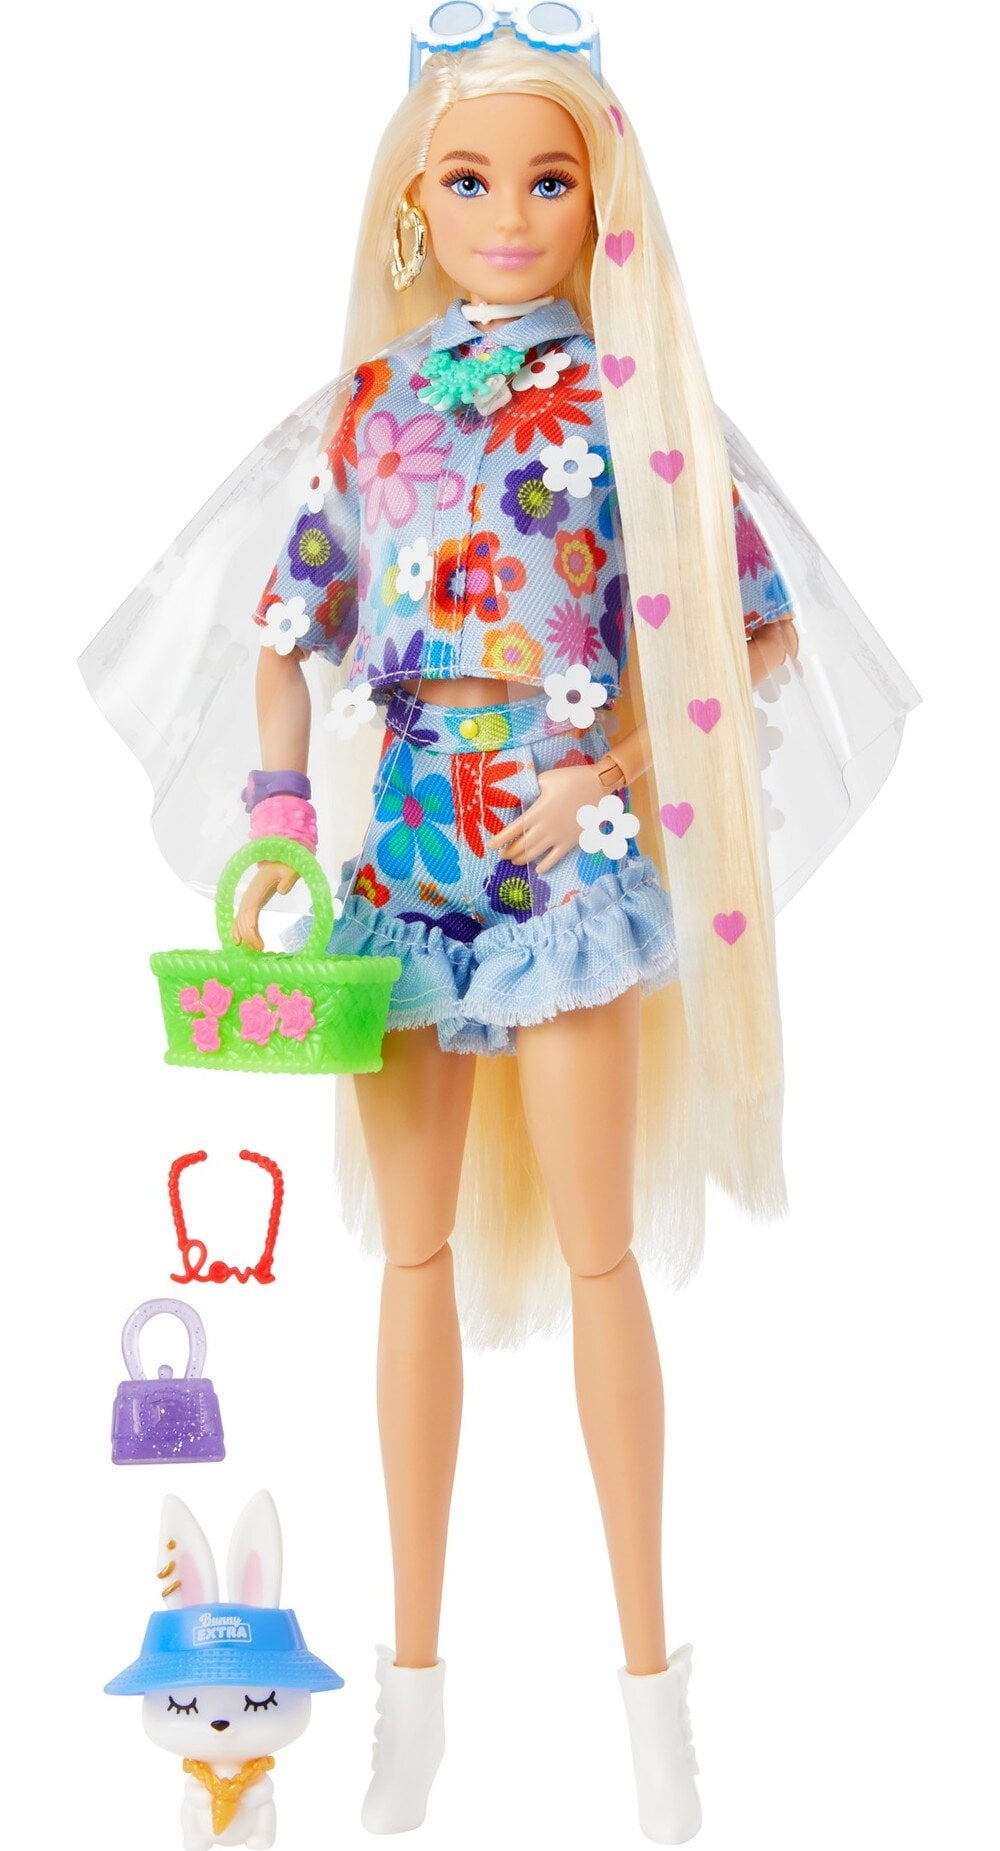 Barbie Extra Fashion Doll with Blonde Hair Dressed 2-Piece Outfit with Accessories & Pet - Walmart.com